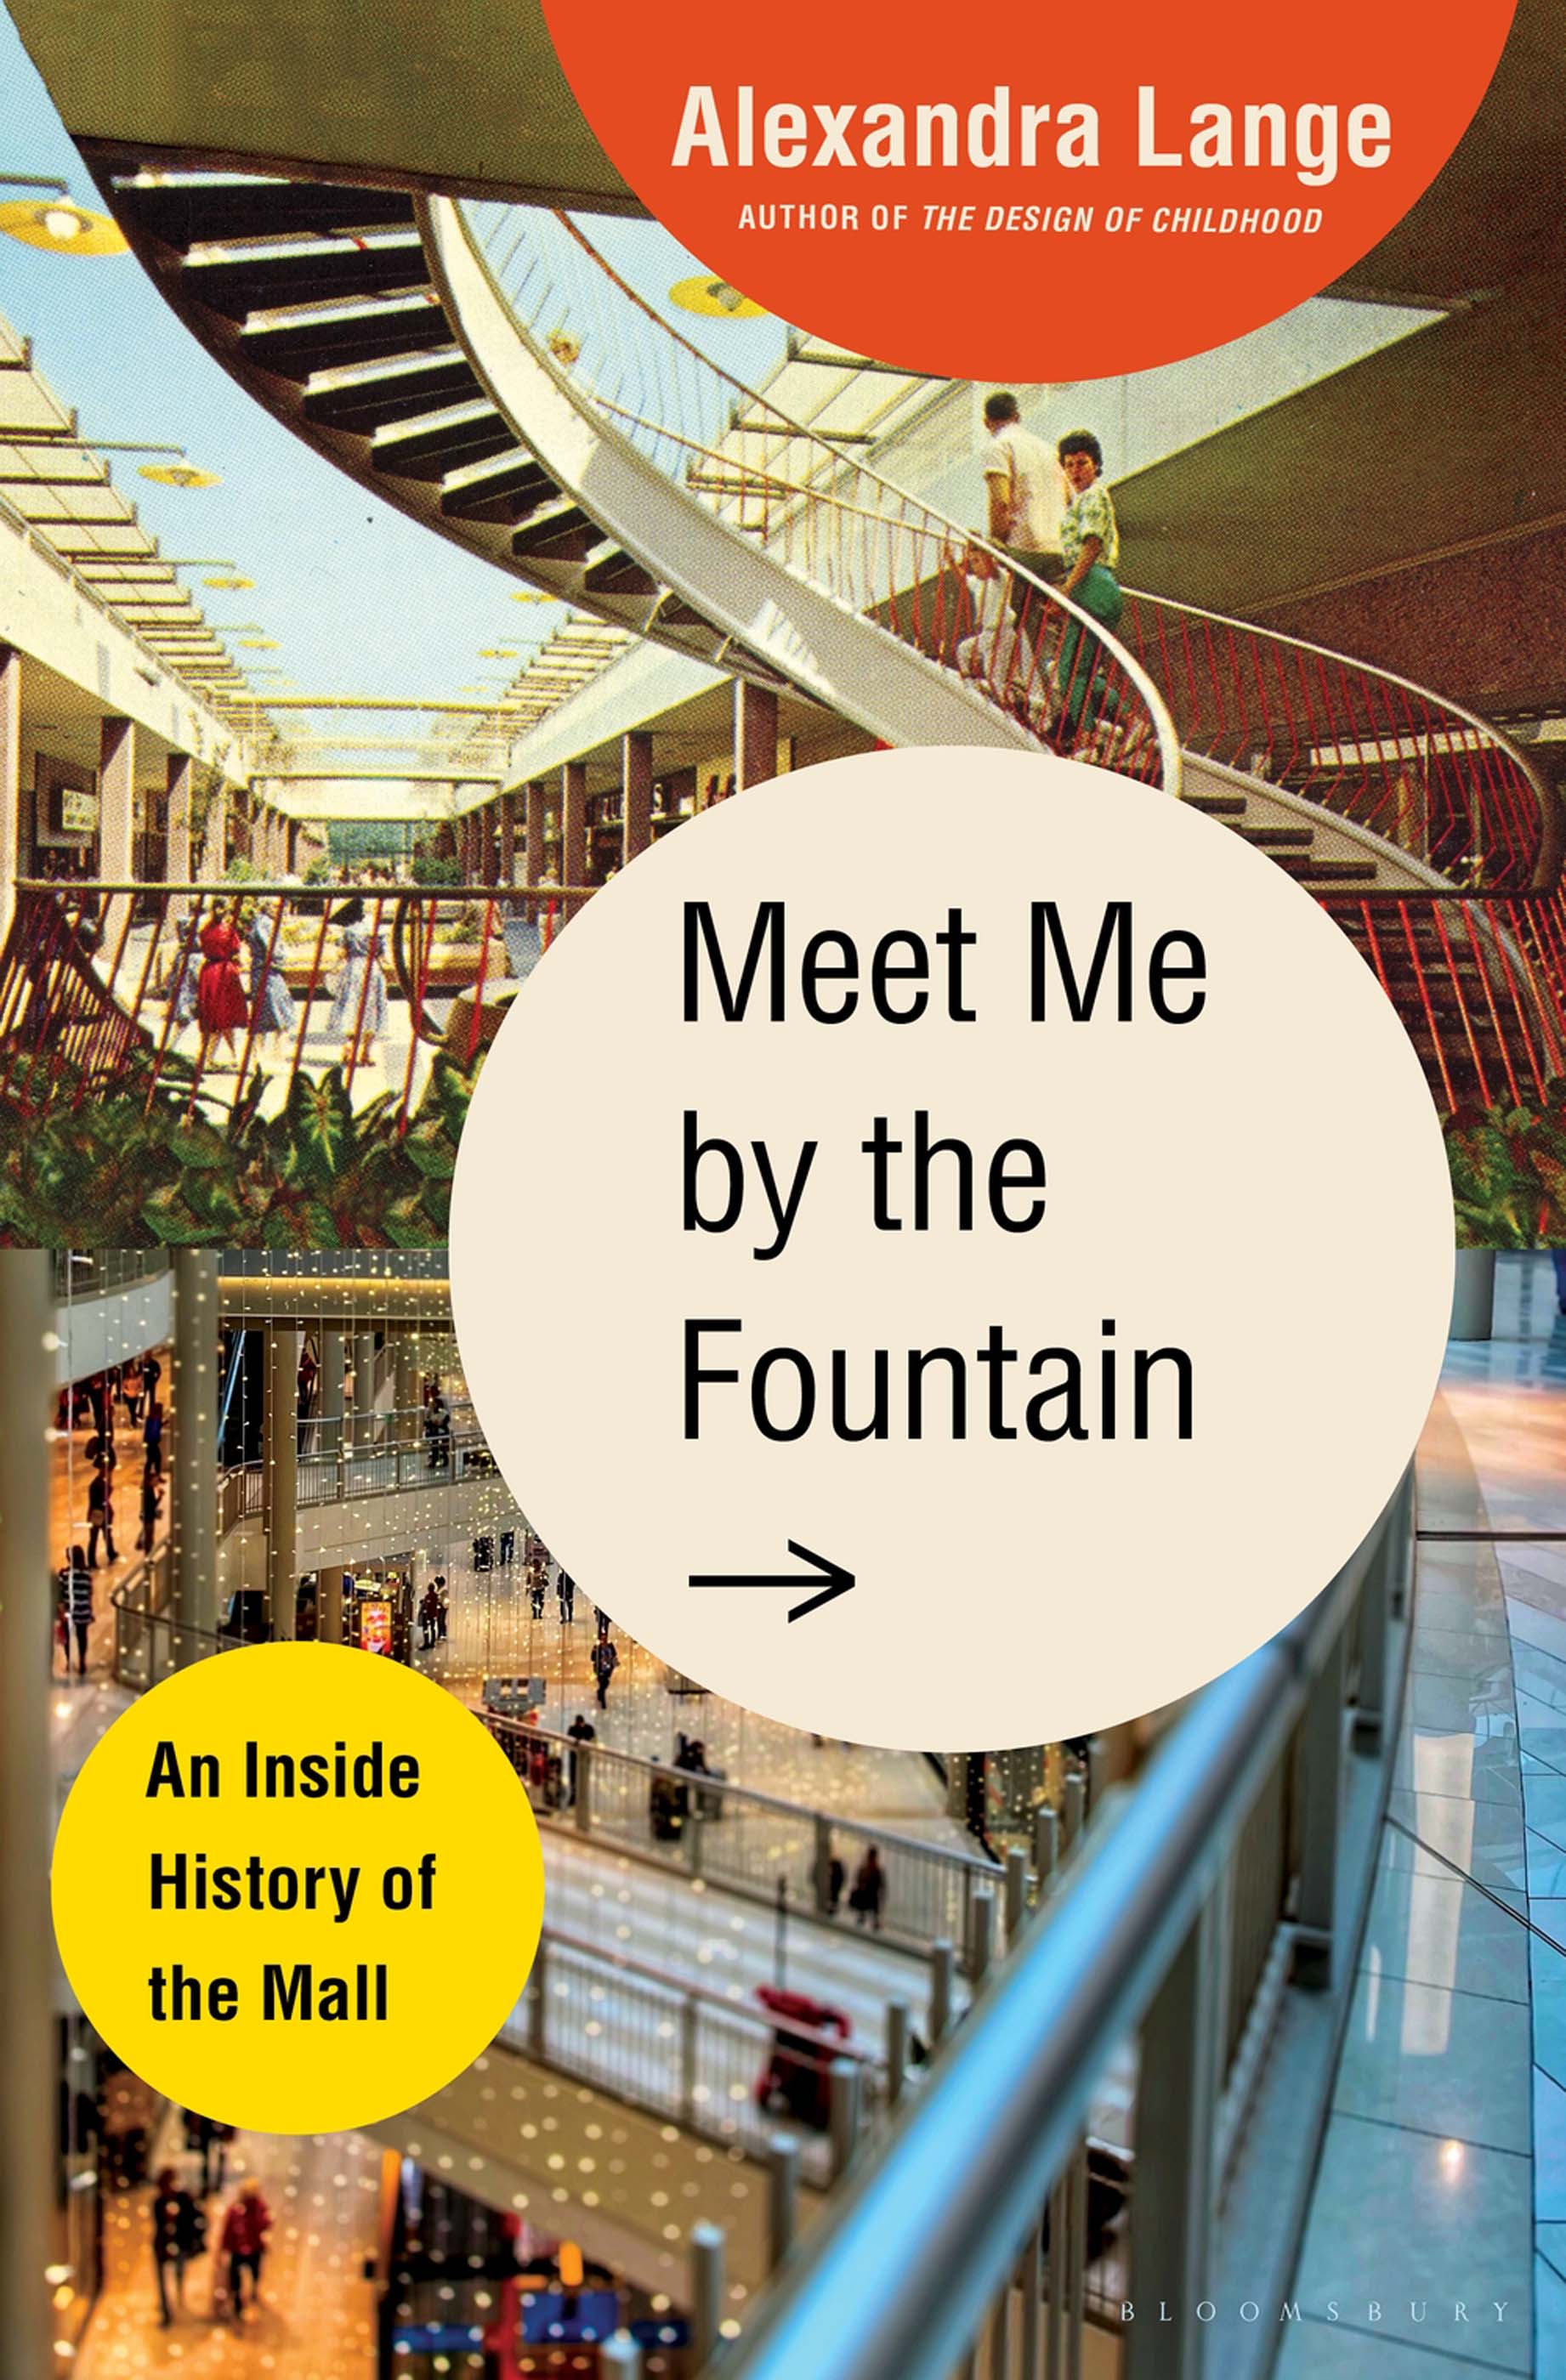 Meet Me by the Fountain chronicles the past, present, and future of malls